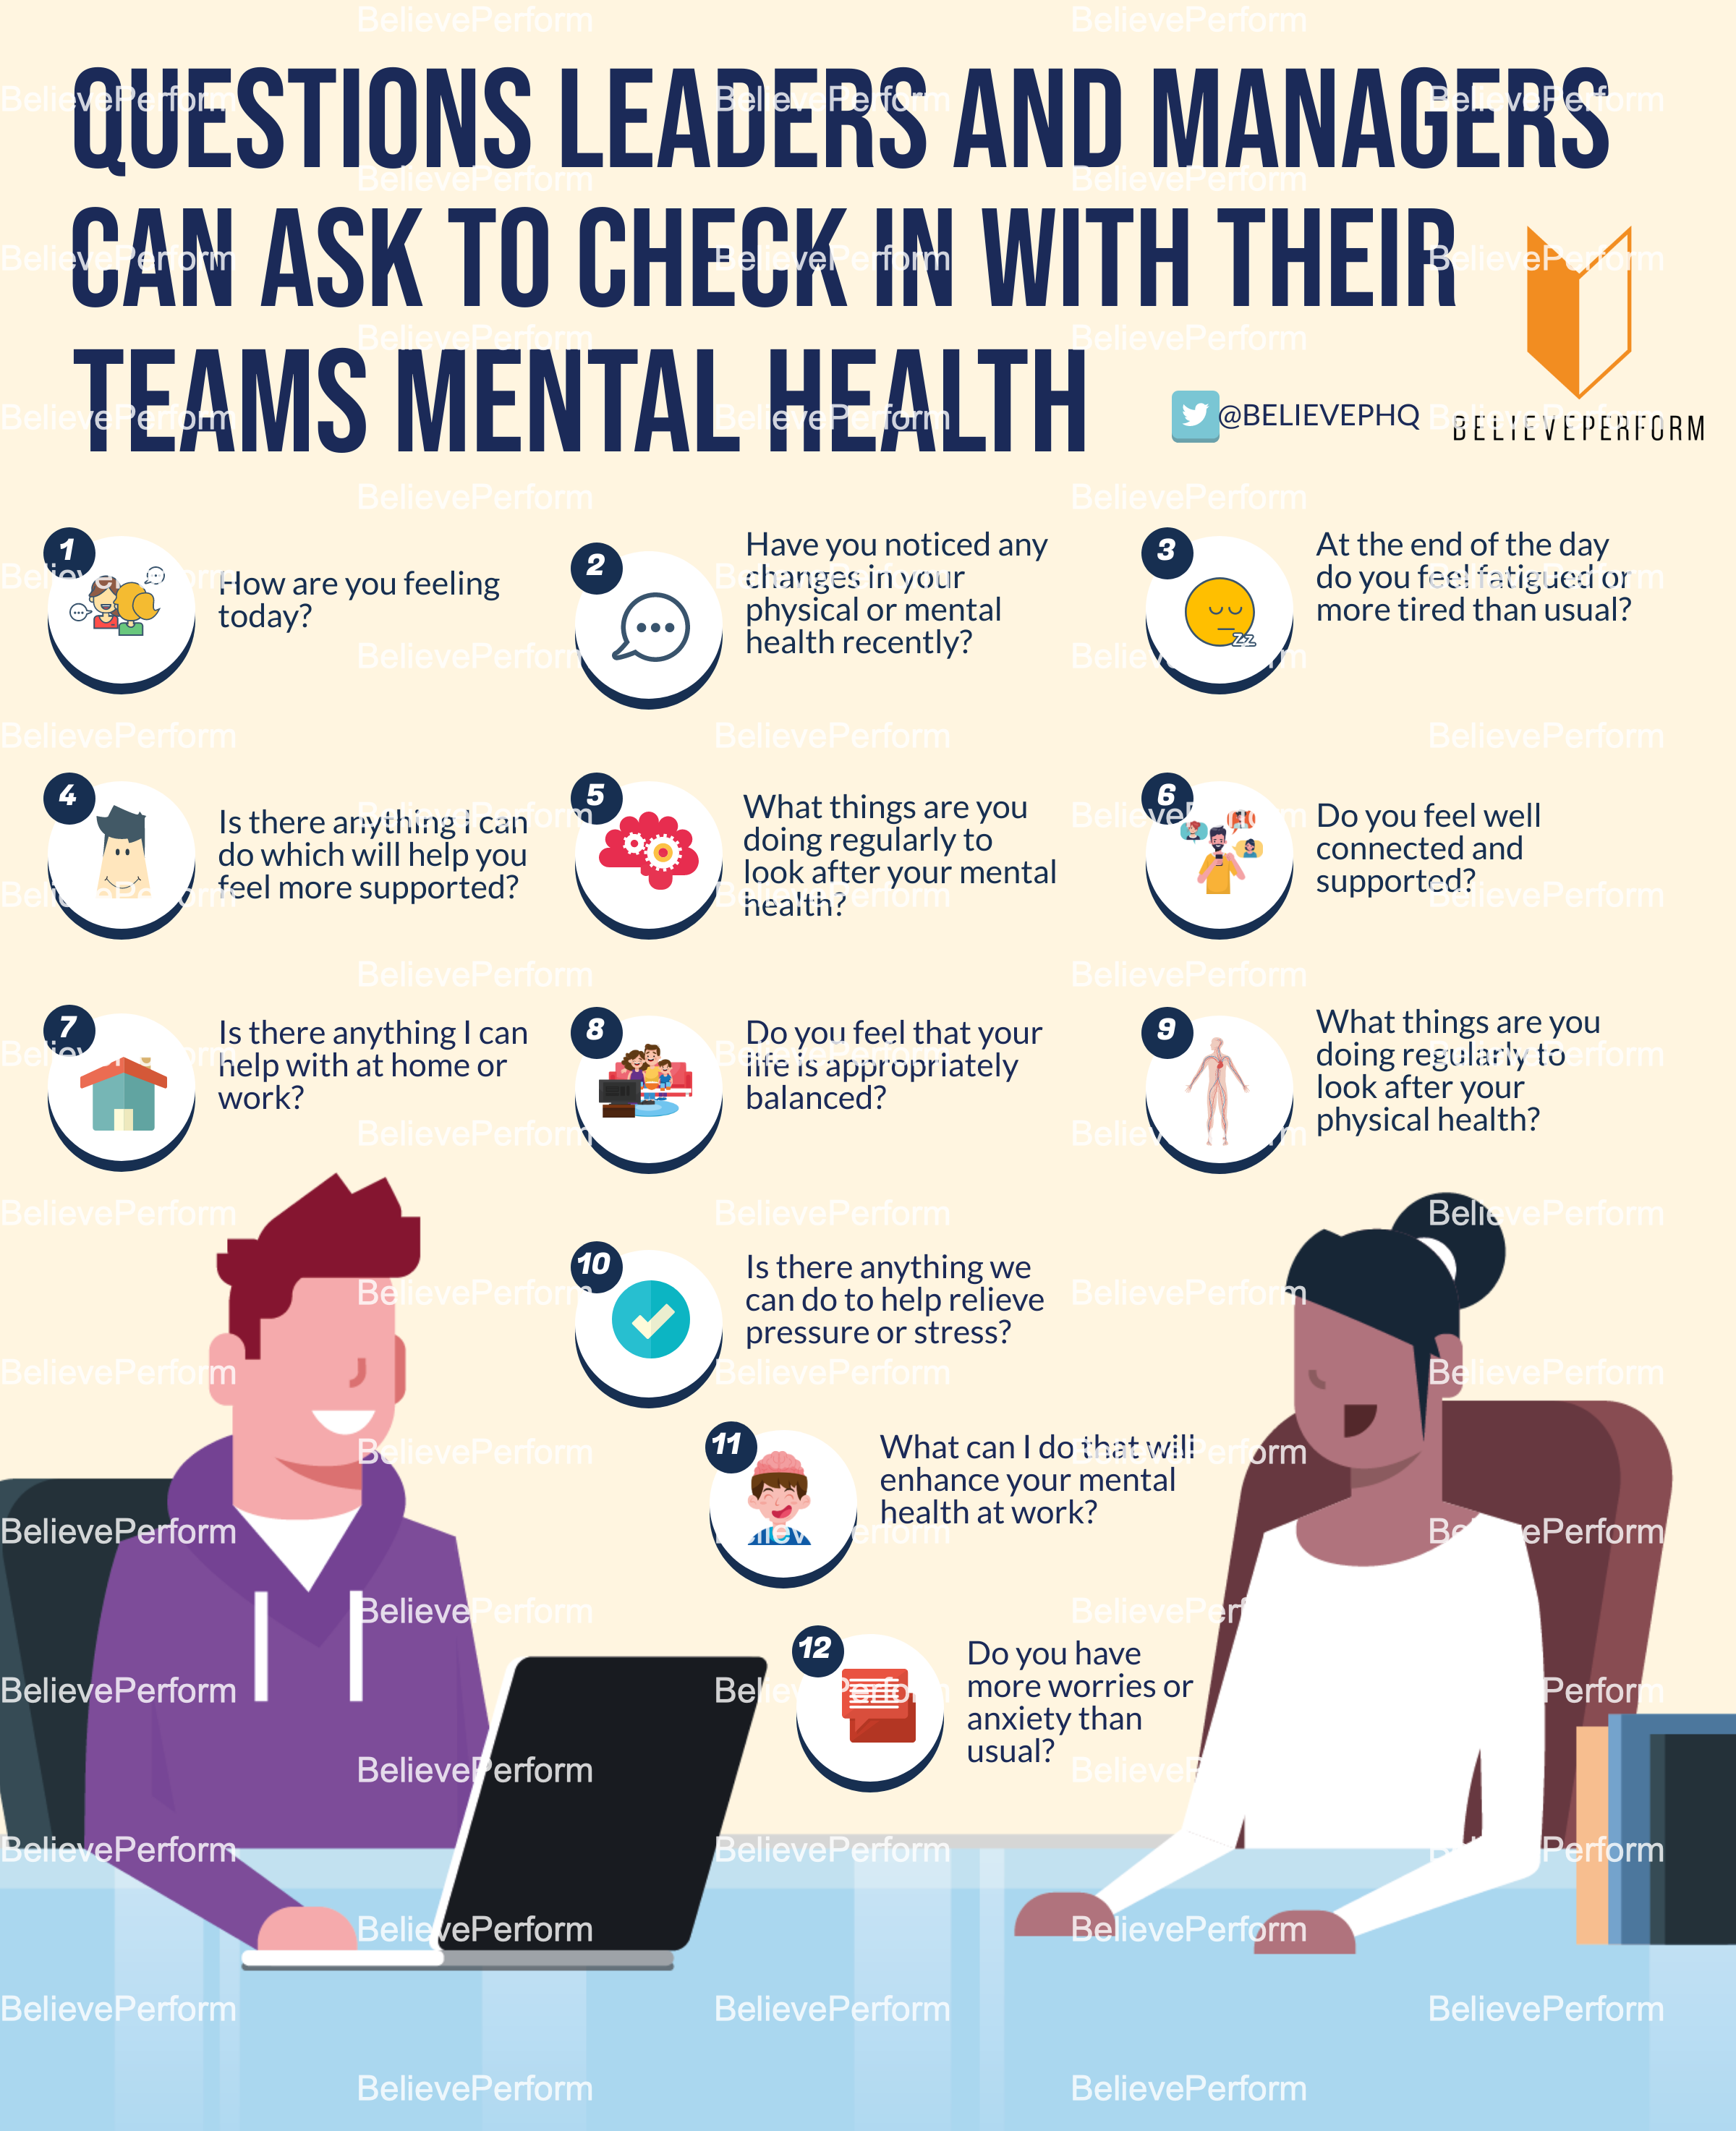 Questions leaders and managers can ask to check in with their teams